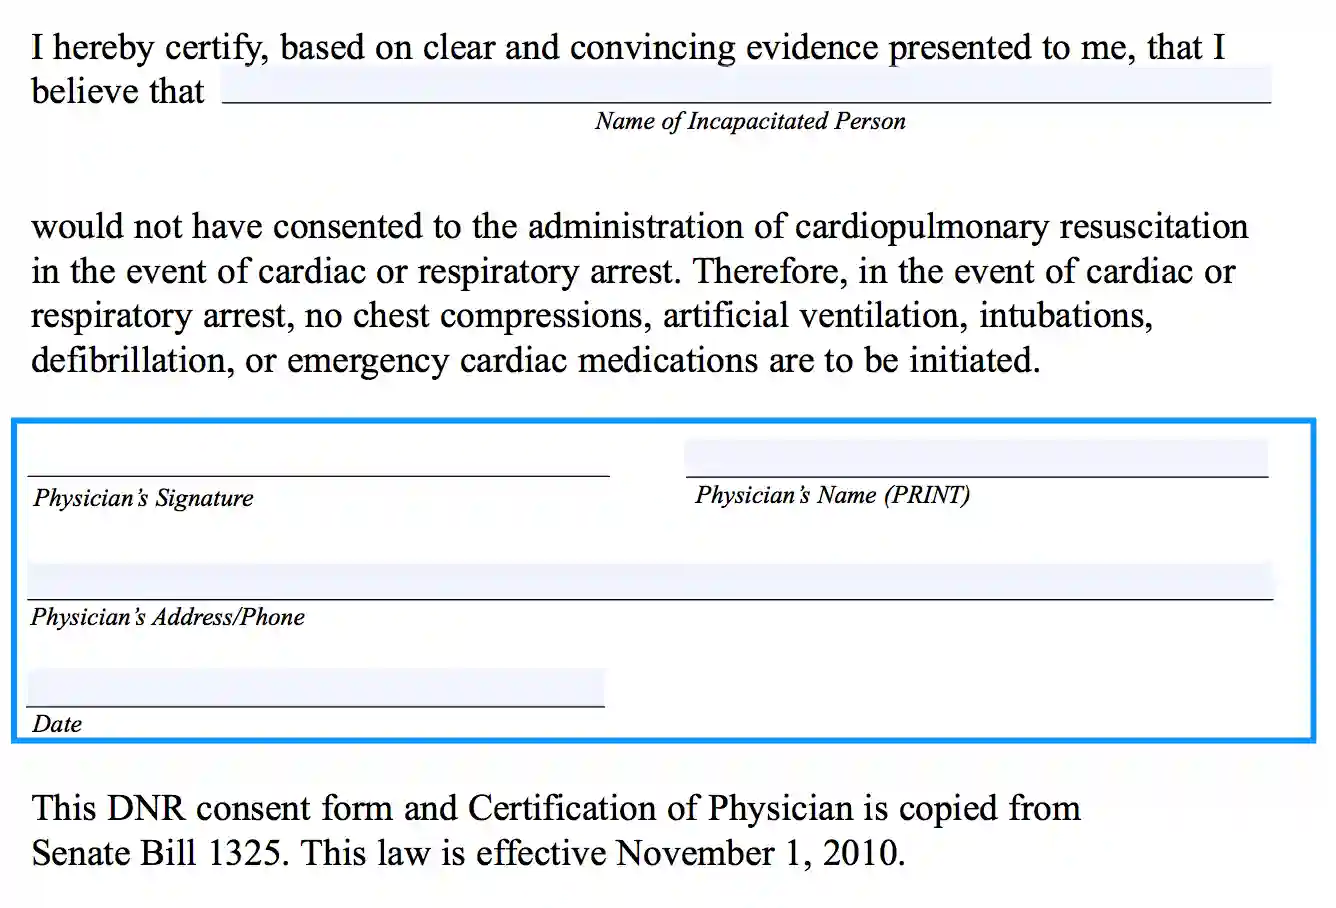 step 2.2 to filling out the oklahoma dnr form - enter the physicians information